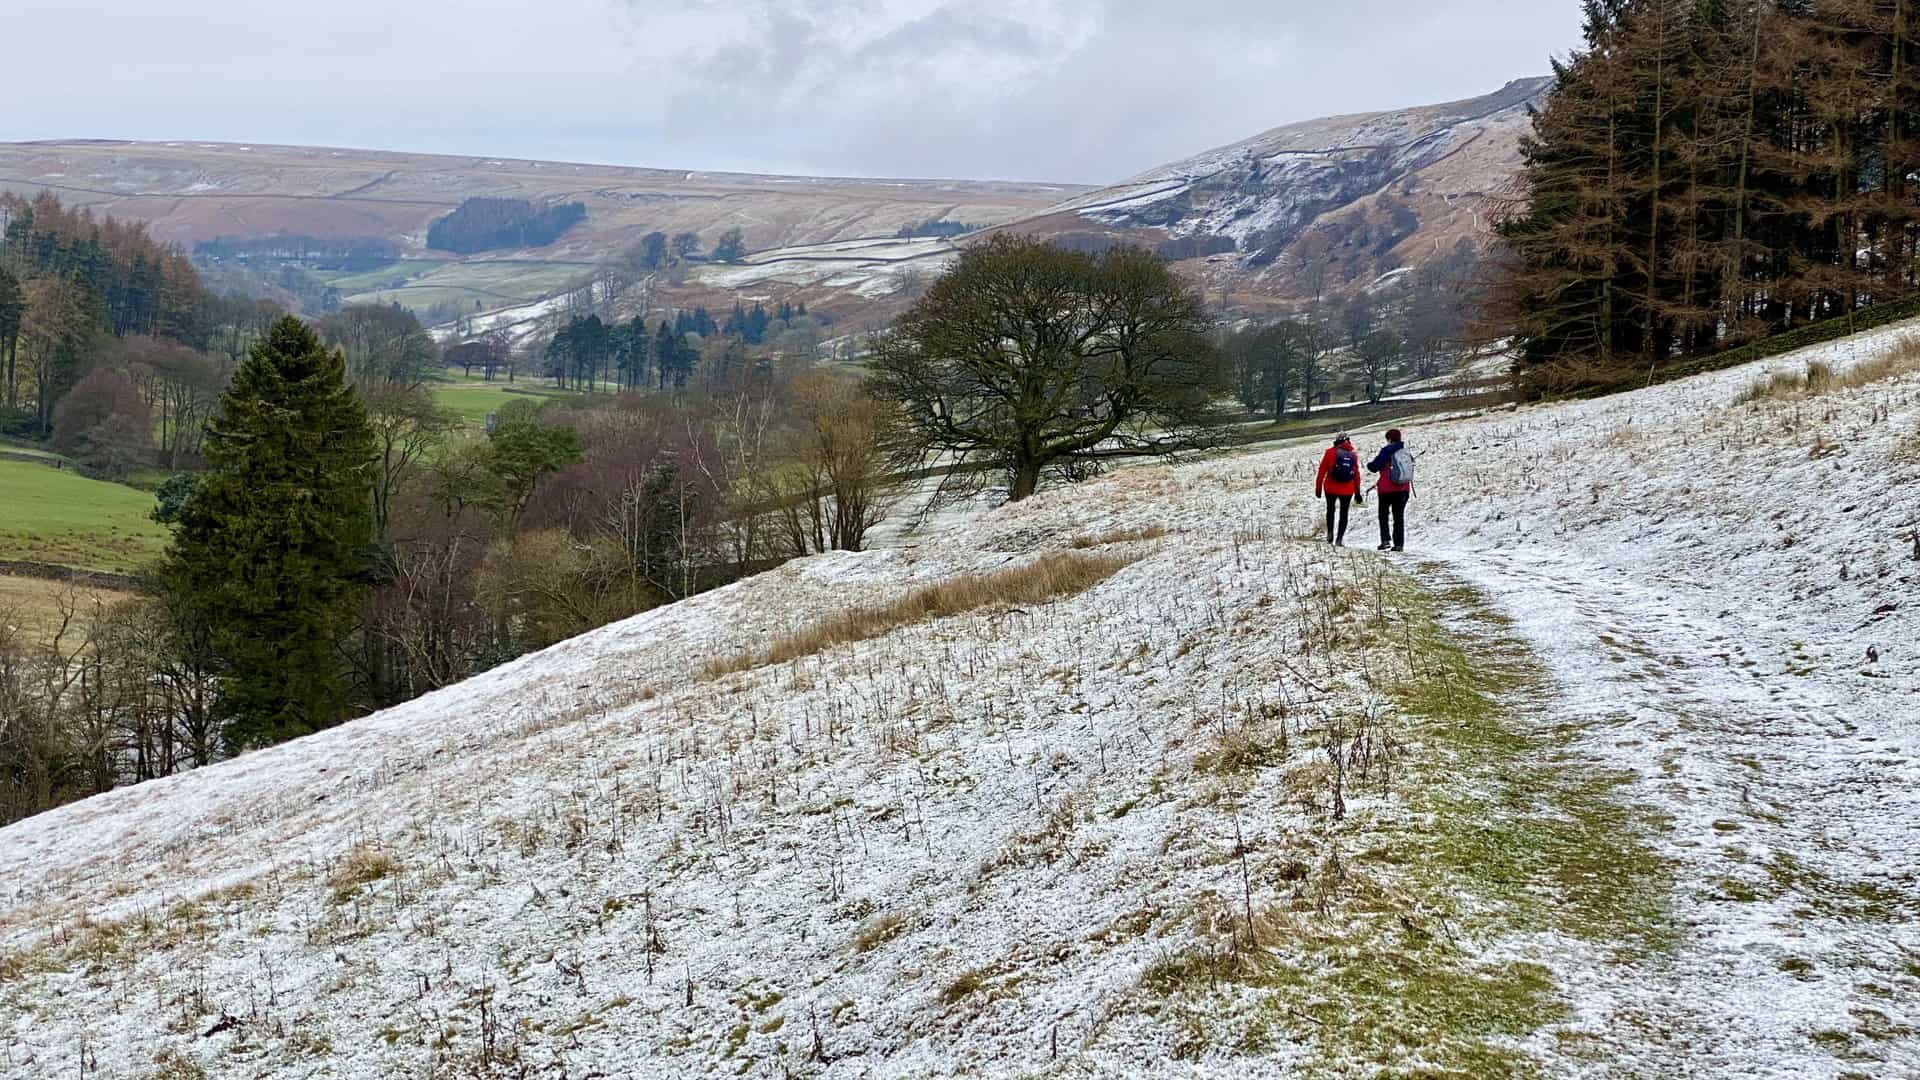 Trekking north on the Nidderdale Way (Thrope Lane) towards Thrope Farm on a brisk, fresh morning with a light dusting of snow underfoot.